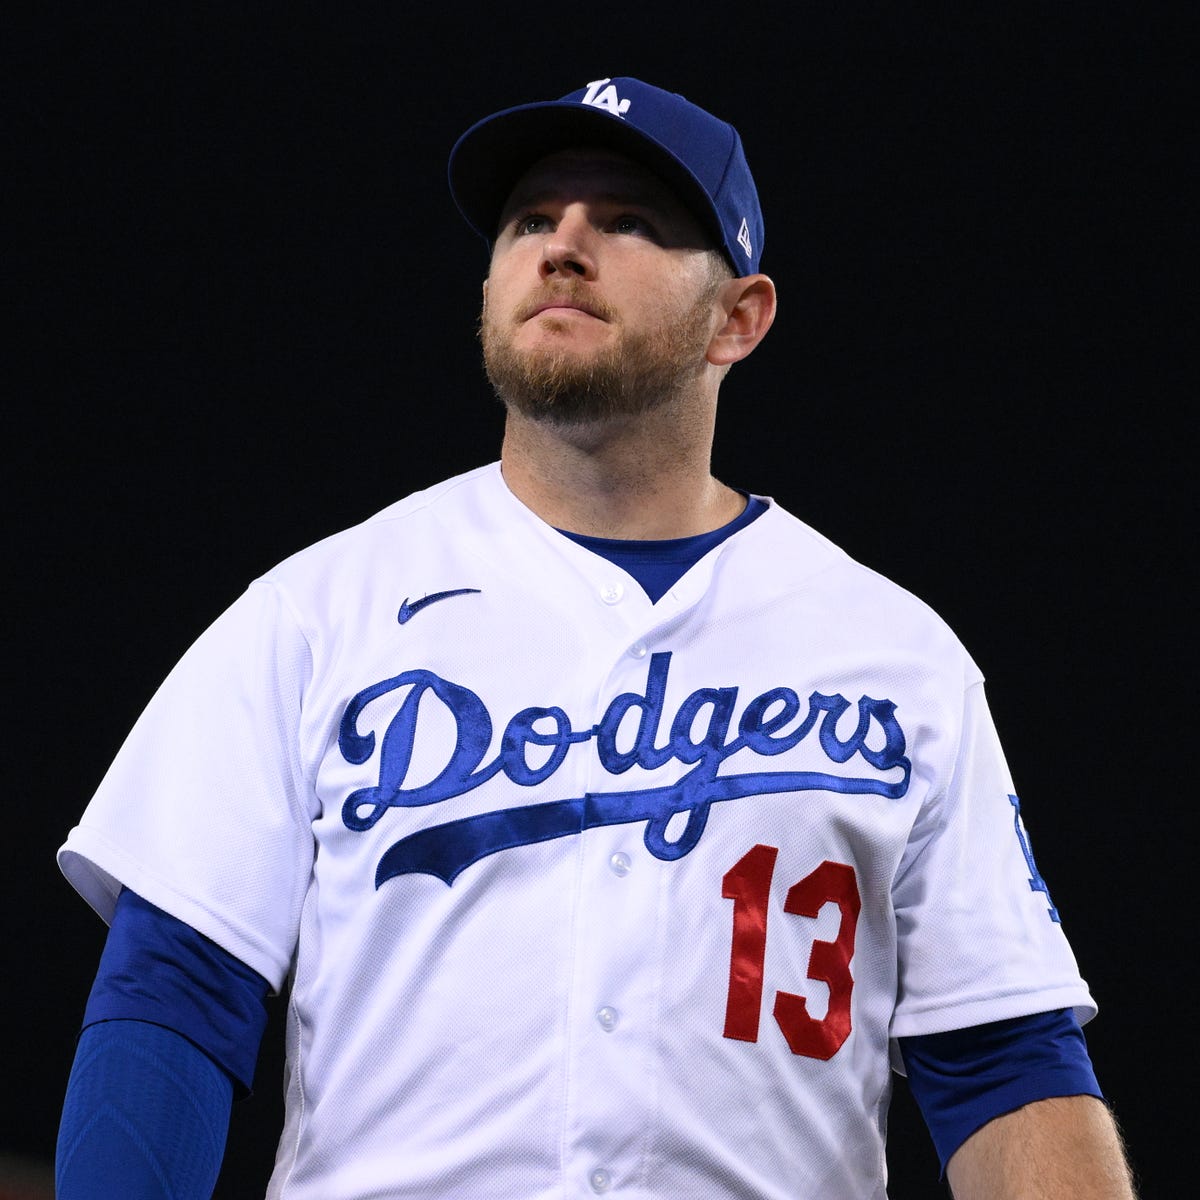 Dodgers Roster: 3 Young Players Who Could Take a Step Forward in